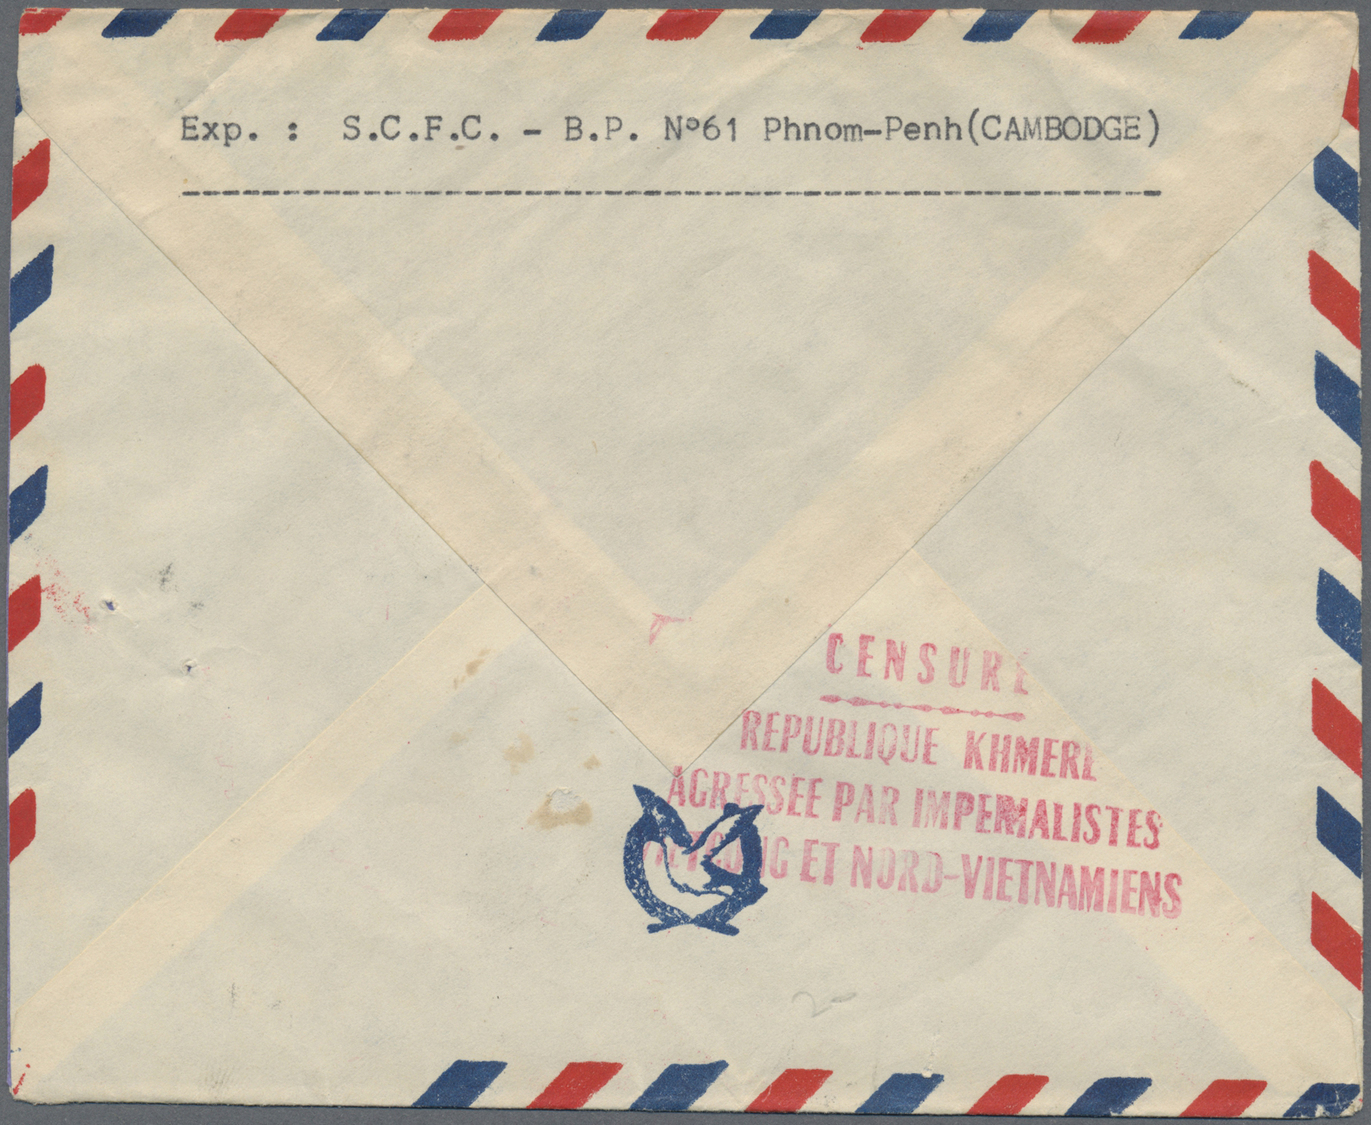 Br Kambodscha: 1970. A selection of Air Mail covers (5) addressed to France with first and second censor cachet in red '